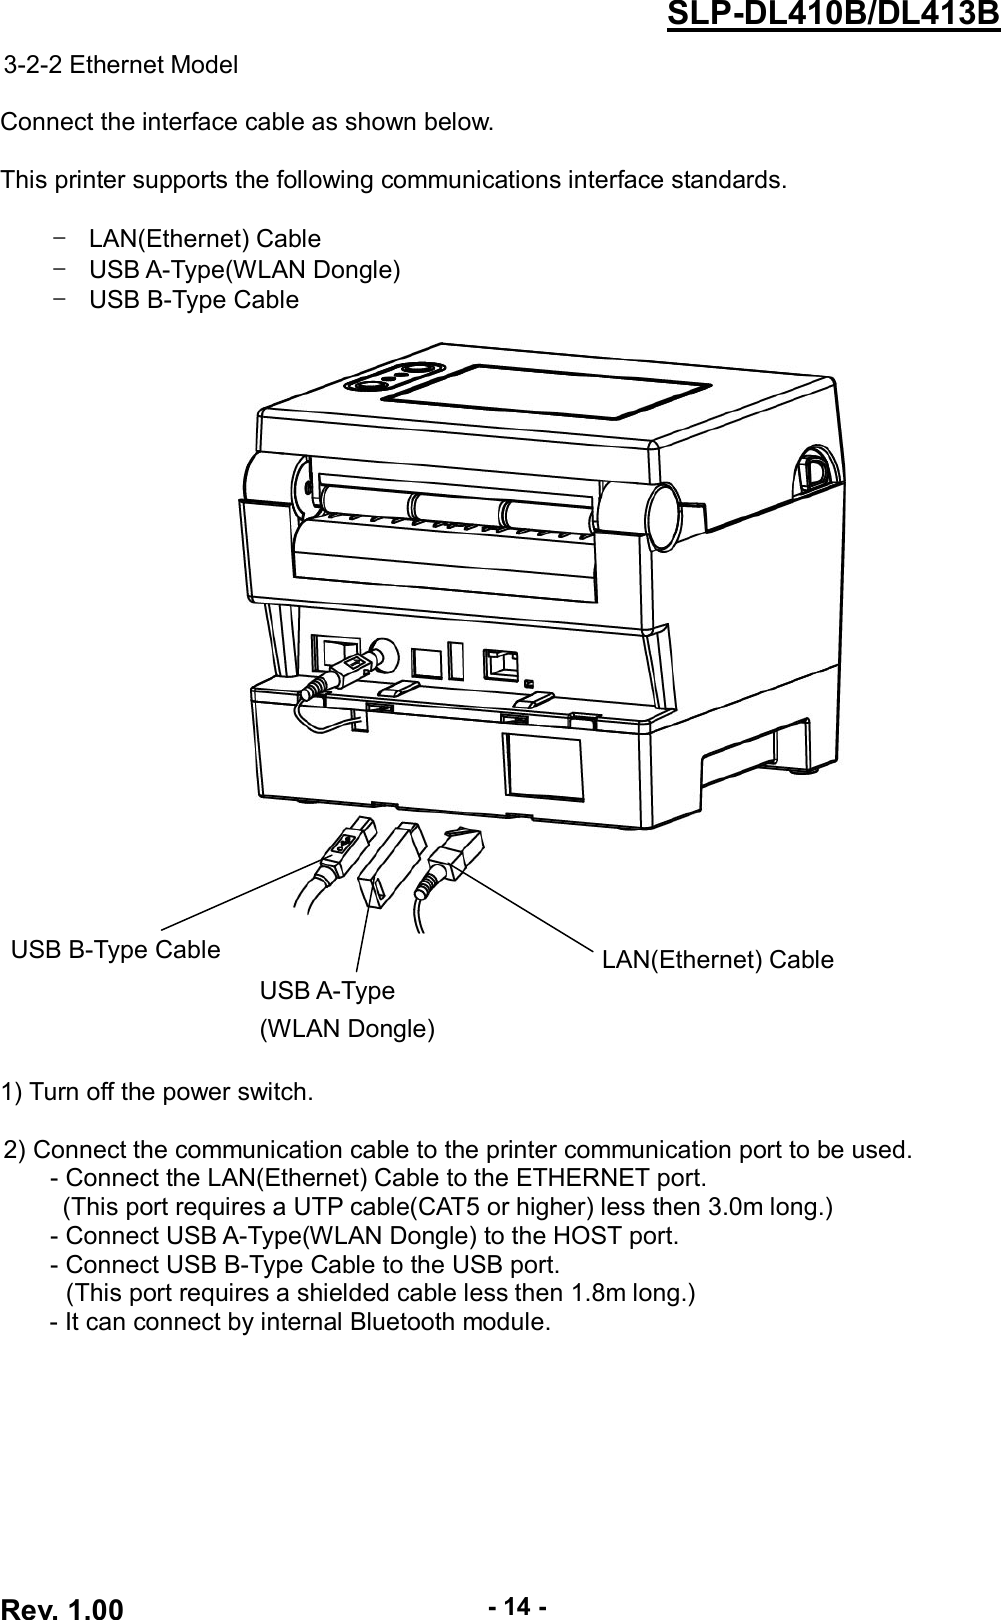  Rev. 1.00 - 14 - SLP-DL410B/DL413B 3-2-2 Ethernet Model  Connect the interface cable as shown below.  This printer supports the following communications interface standards.  -  LAN(Ethernet) Cable -  USB A-Type(WLAN Dongle) -  USB B-Type Cable             1) Turn off the power switch.  2) Connect the communication cable to the printer communication port to be used. - Connect the LAN(Ethernet) Cable to the ETHERNET port. (This port requires a UTP cable(CAT5 or higher) less then 3.0m long.) - Connect USB A-Type(WLAN Dongle) to the HOST port. - Connect USB B-Type Cable to the USB port.           (This port requires a shielded cable less then 1.8m long.) - It can connect by internal Bluetooth module. USB B-Type Cable  LAN(Ethernet) Cable USB A-Type (WLAN Dongle) 